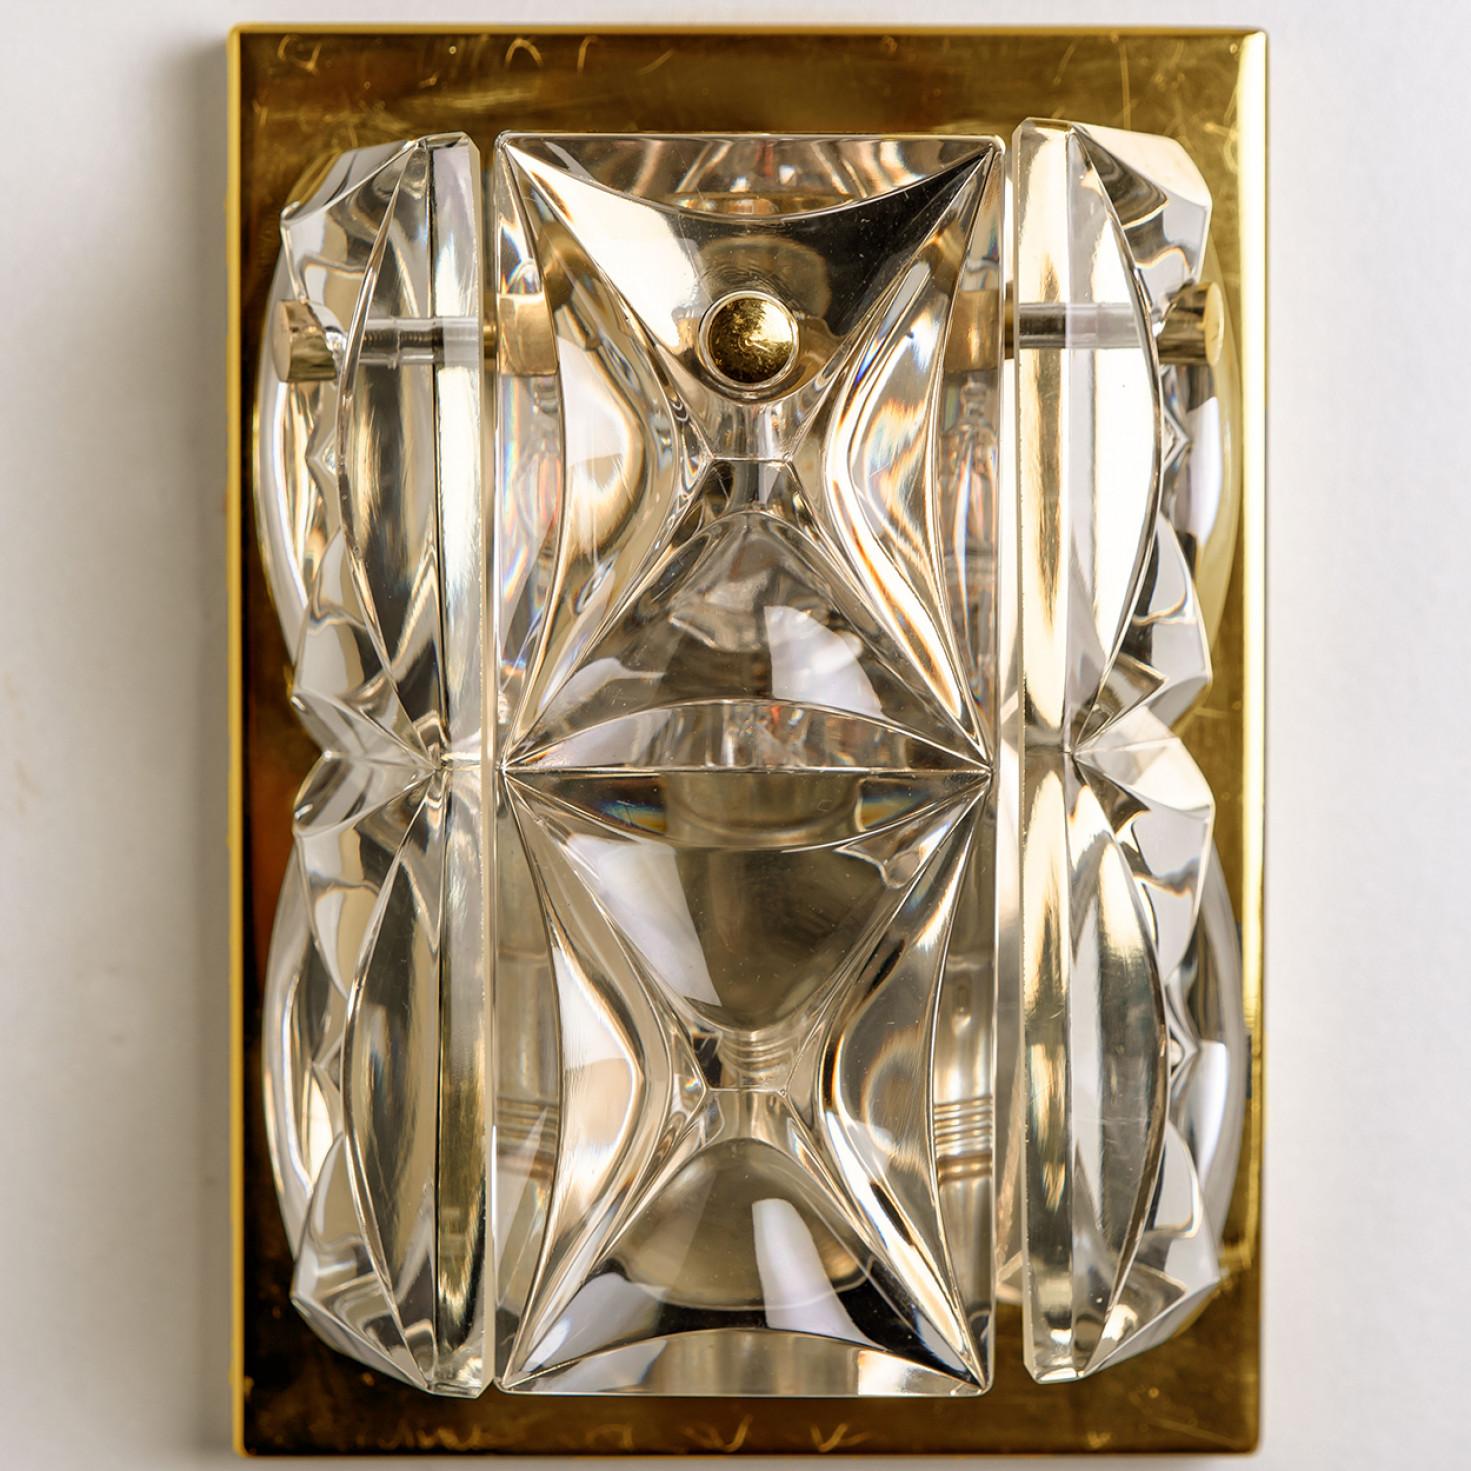 Plated Pair of Kinkeldey Wall Light Fixtures, Crystal Glass, 1970 For Sale